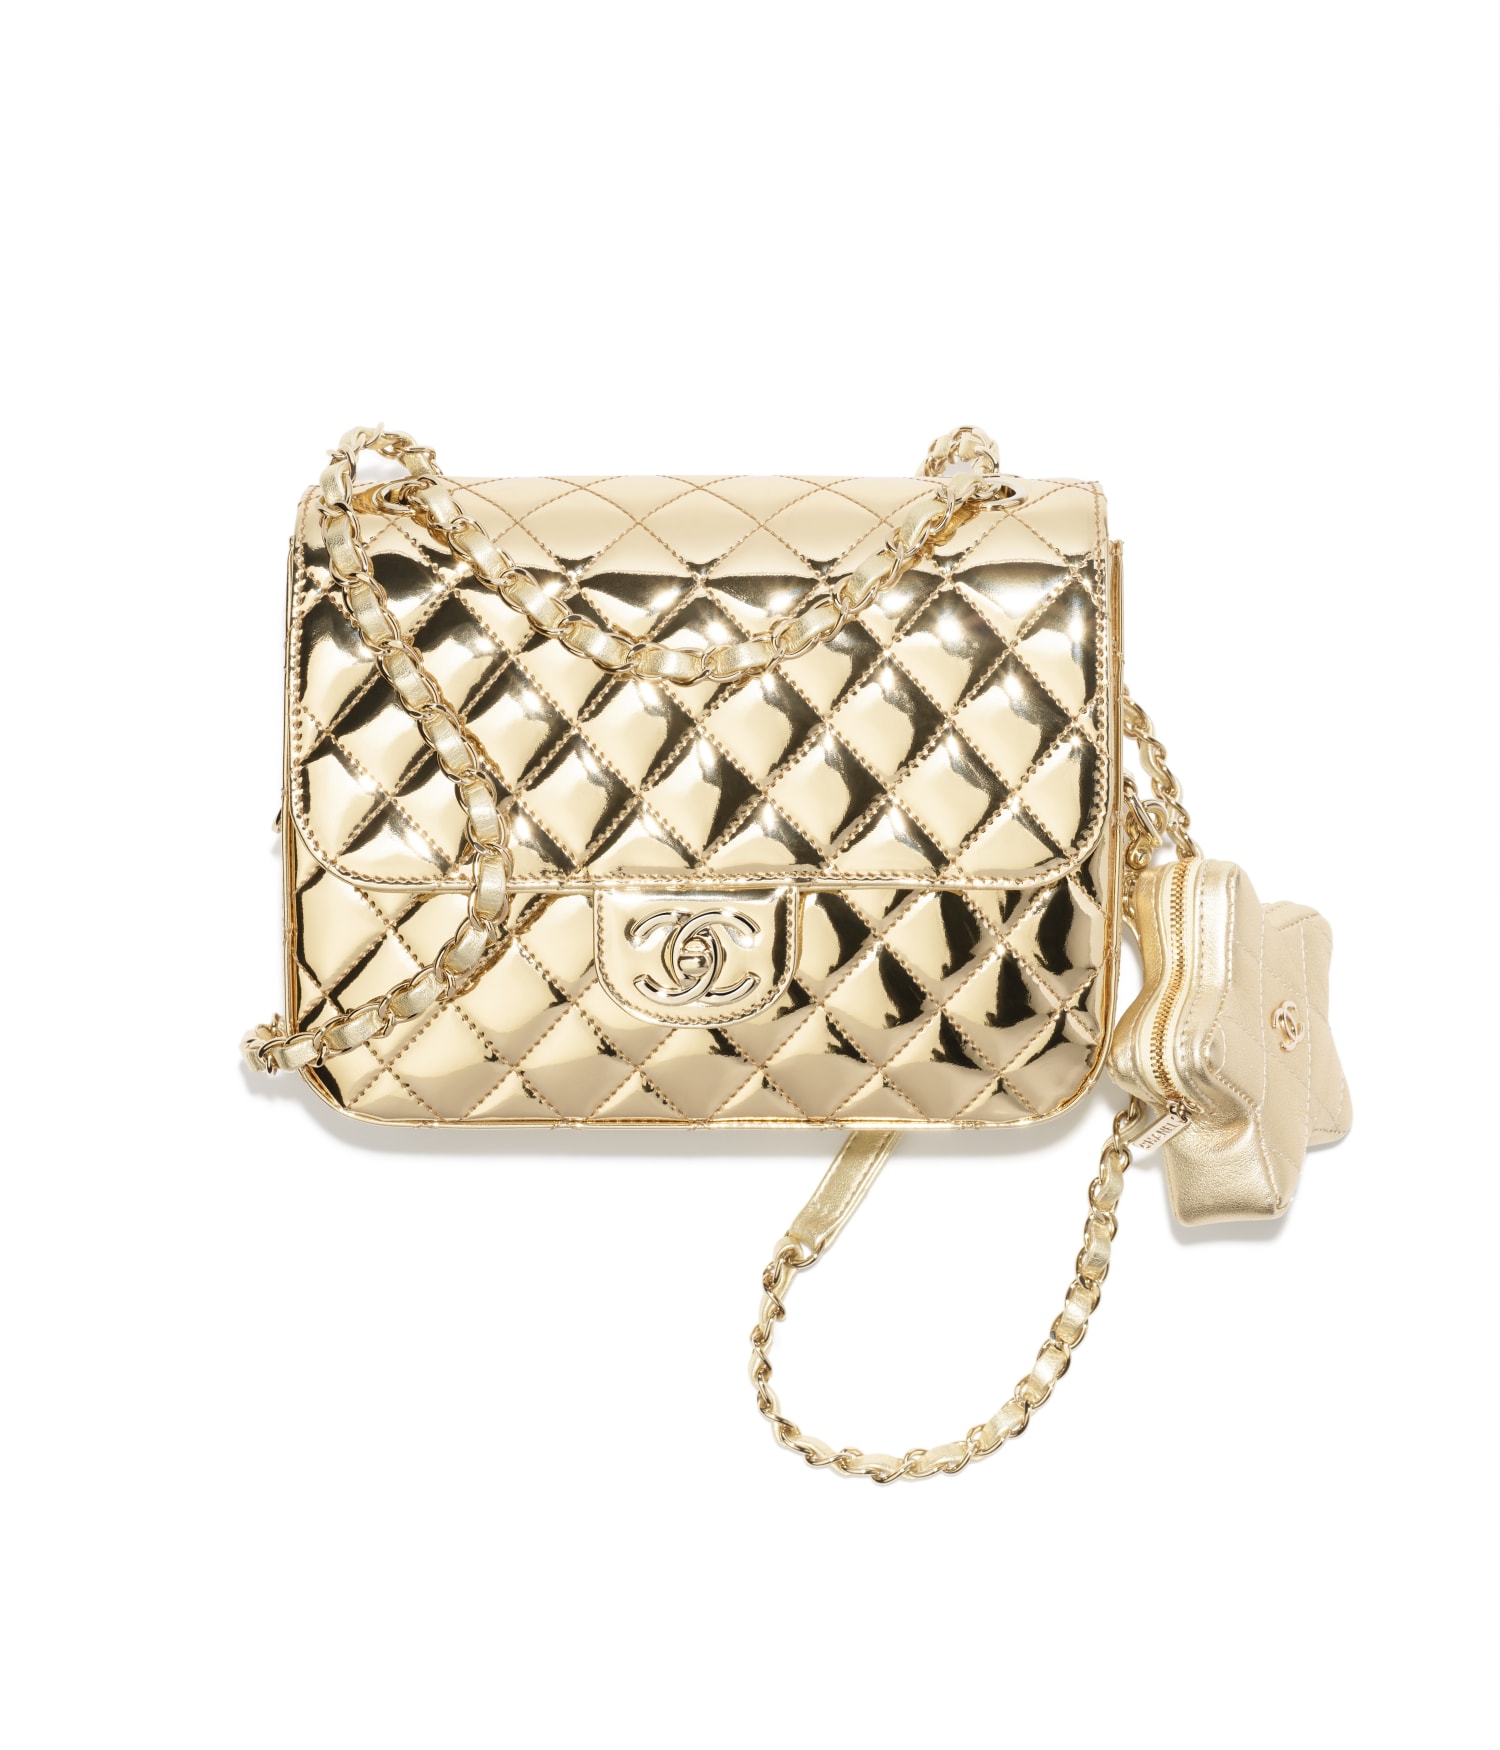 chanel_bag-in-light-gold-mirror-leather-metallic-leather-and-metal-as4649-b14873-nt671-hd-LD